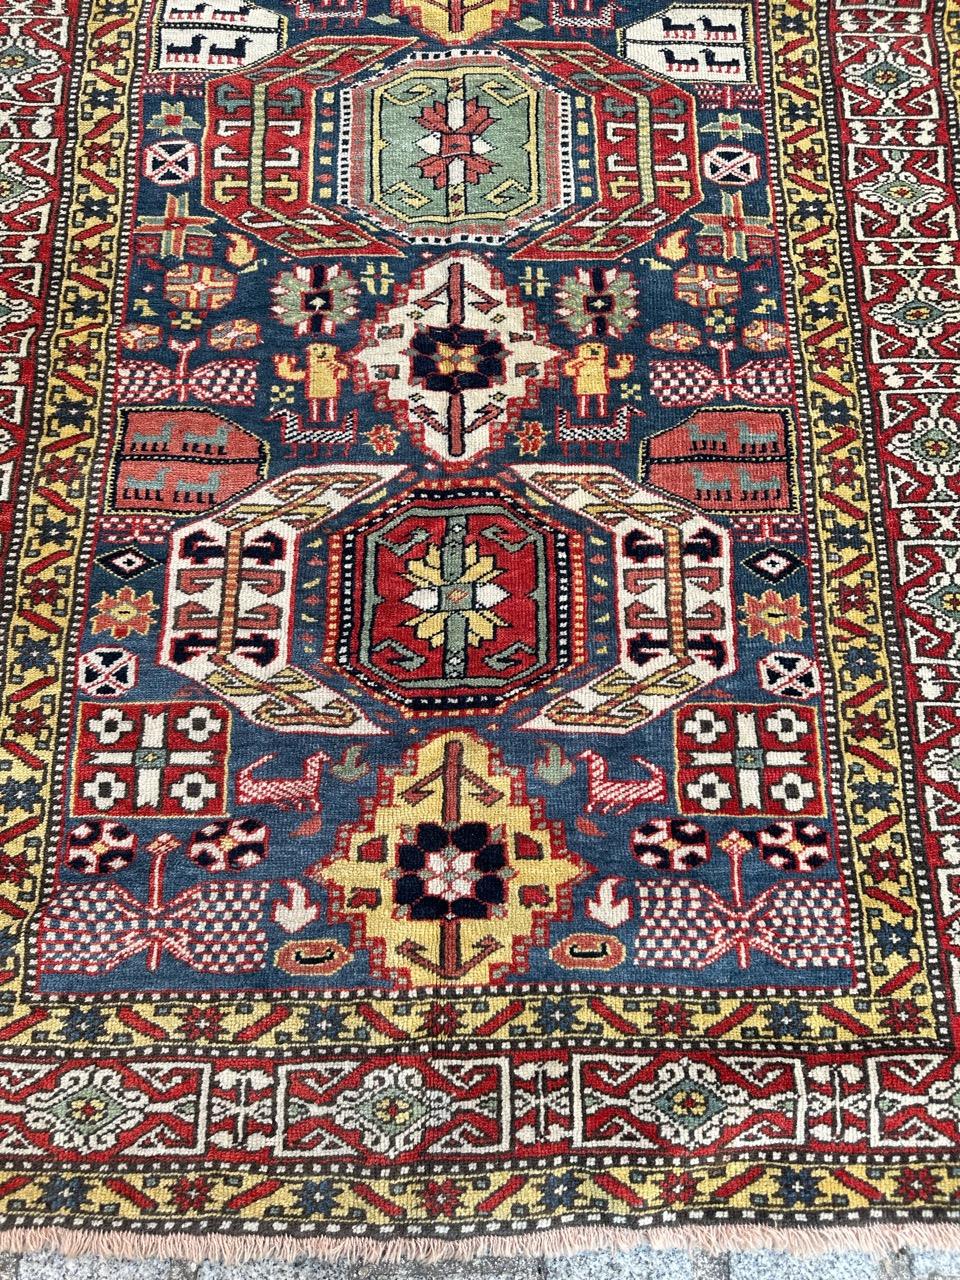 Introducing a stunning mid-century Caucasian Shirwan rug! This exquisite piece showcases the captivating design of antique Shirwan rugs, featuring the same traditional structure, materials, and colors. Meticulously hand-knotted using wool velvet on